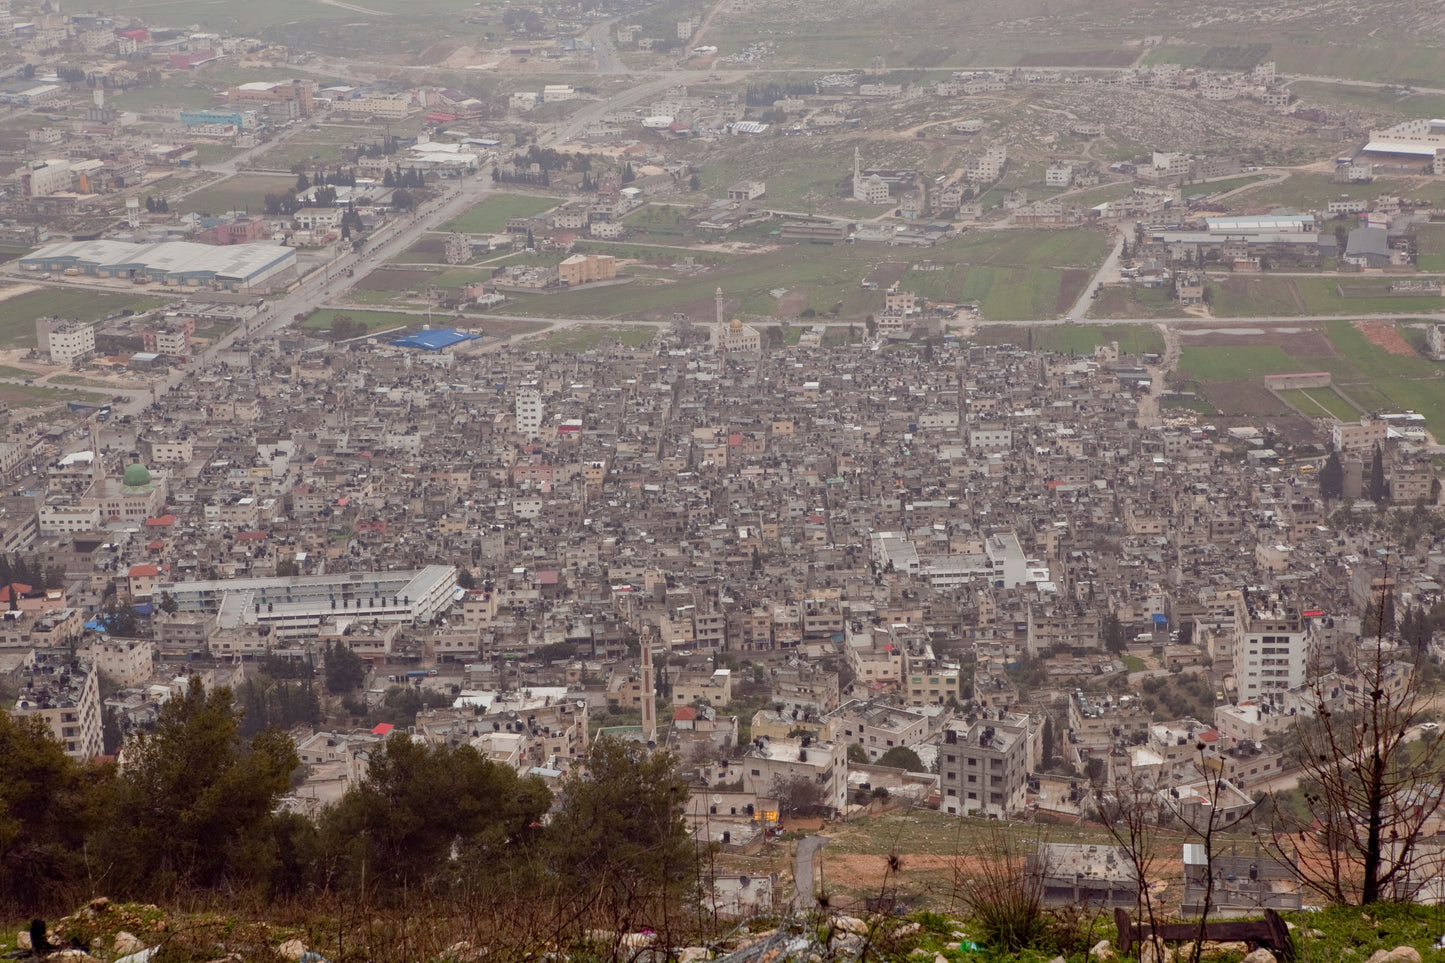 View of the city of Nablus Israel